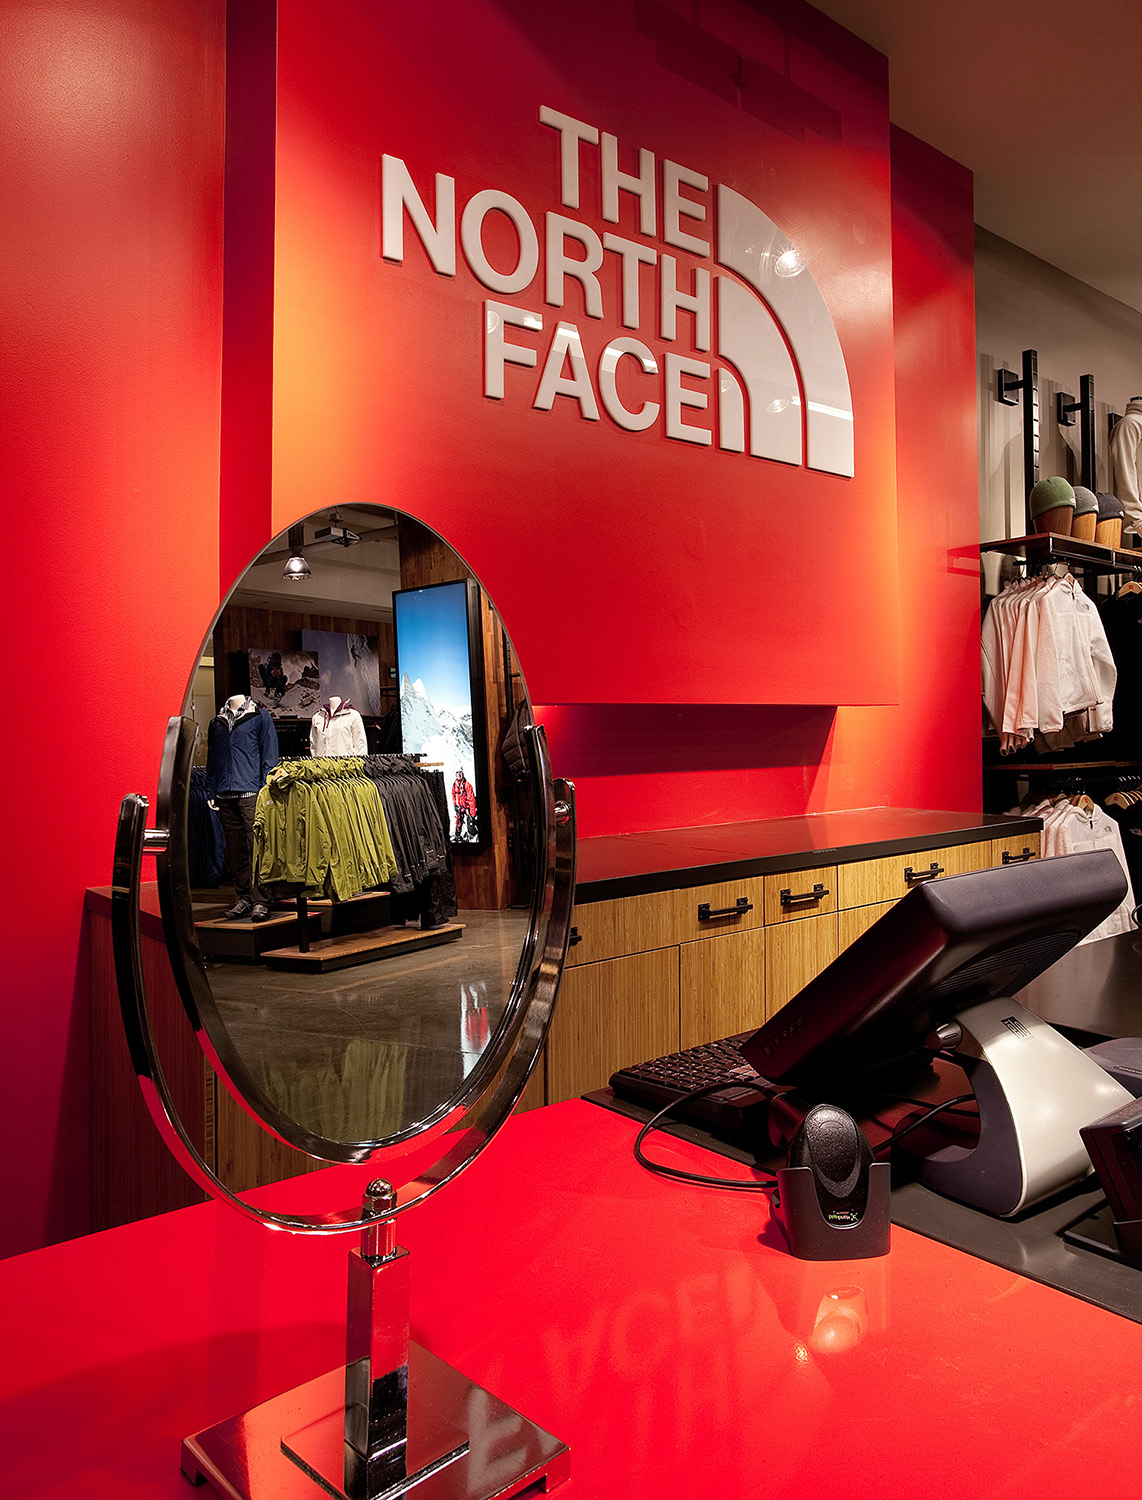 The North Face, Toronto